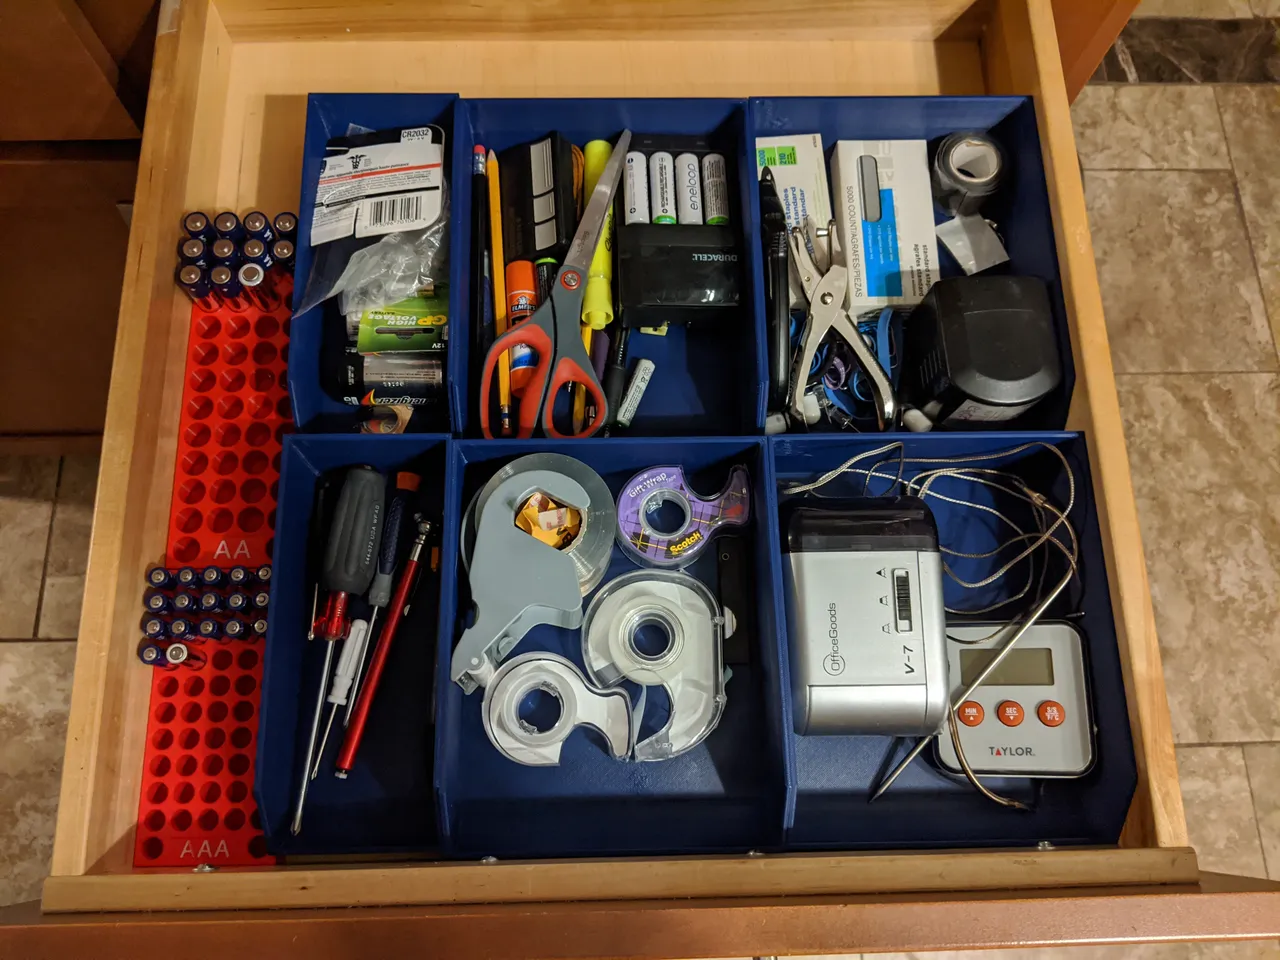 Yet Another Junk Drawer Organizer by ScooterMAC